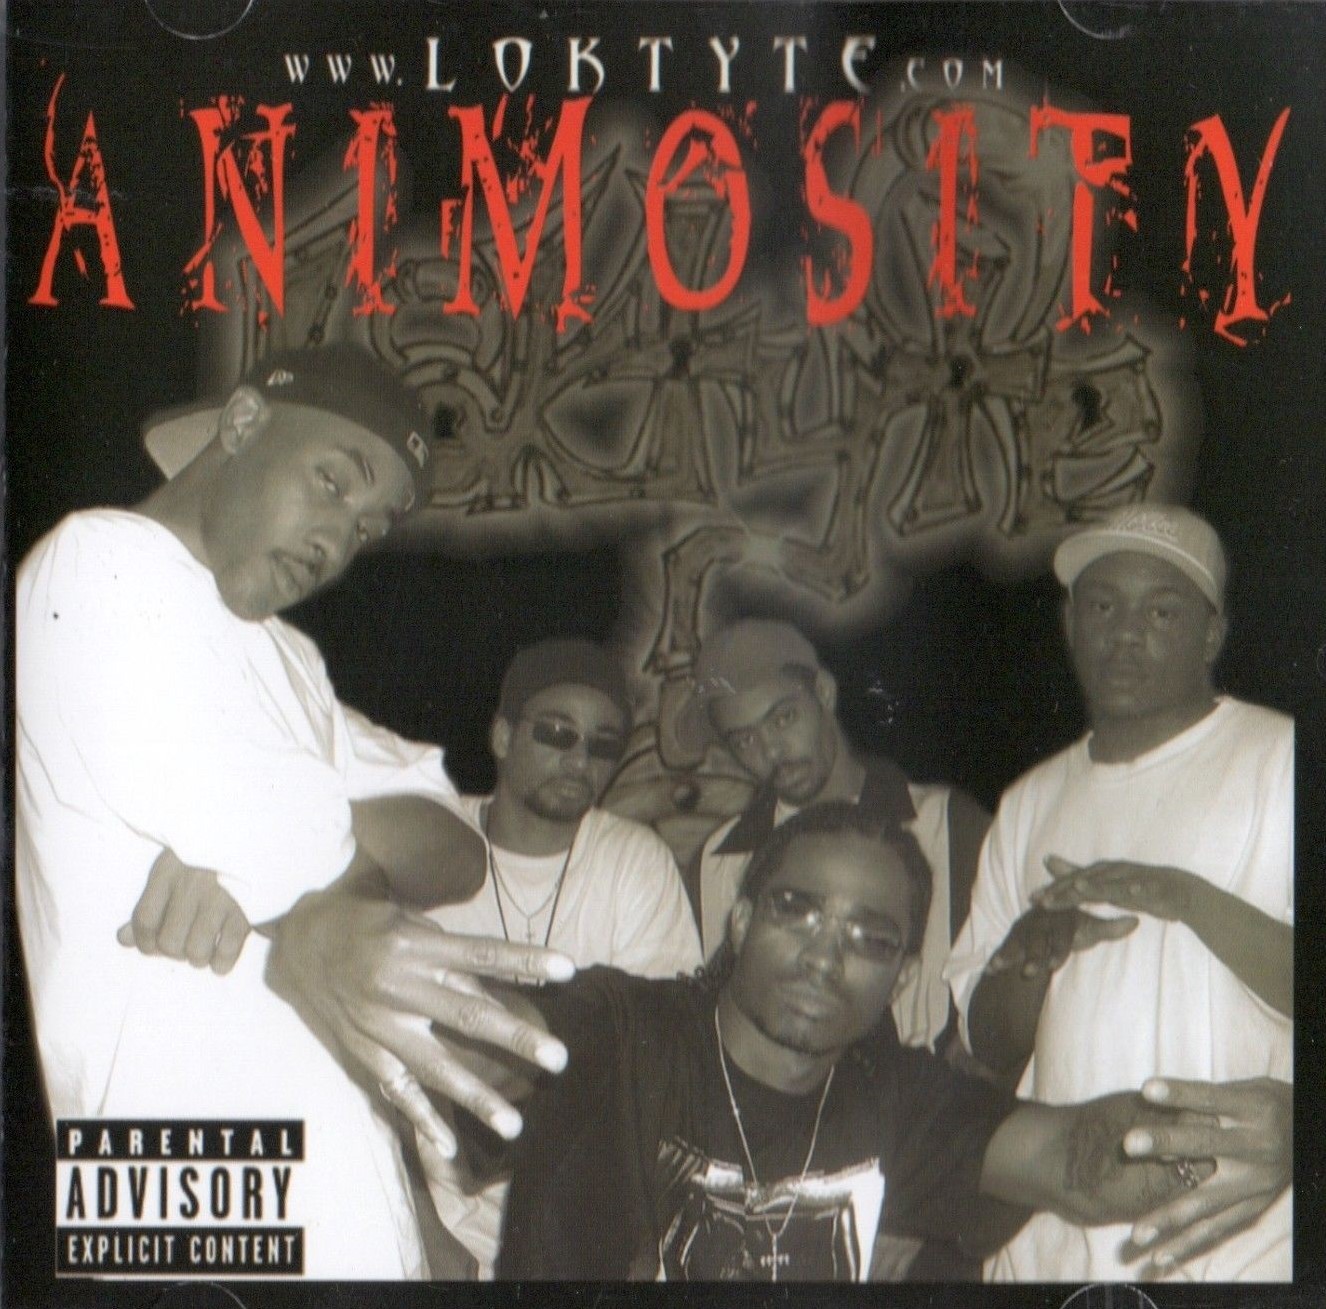 Animosity by LokTyte (CD 2005 LokTyte Entertainment) in Decatur | Rap ...